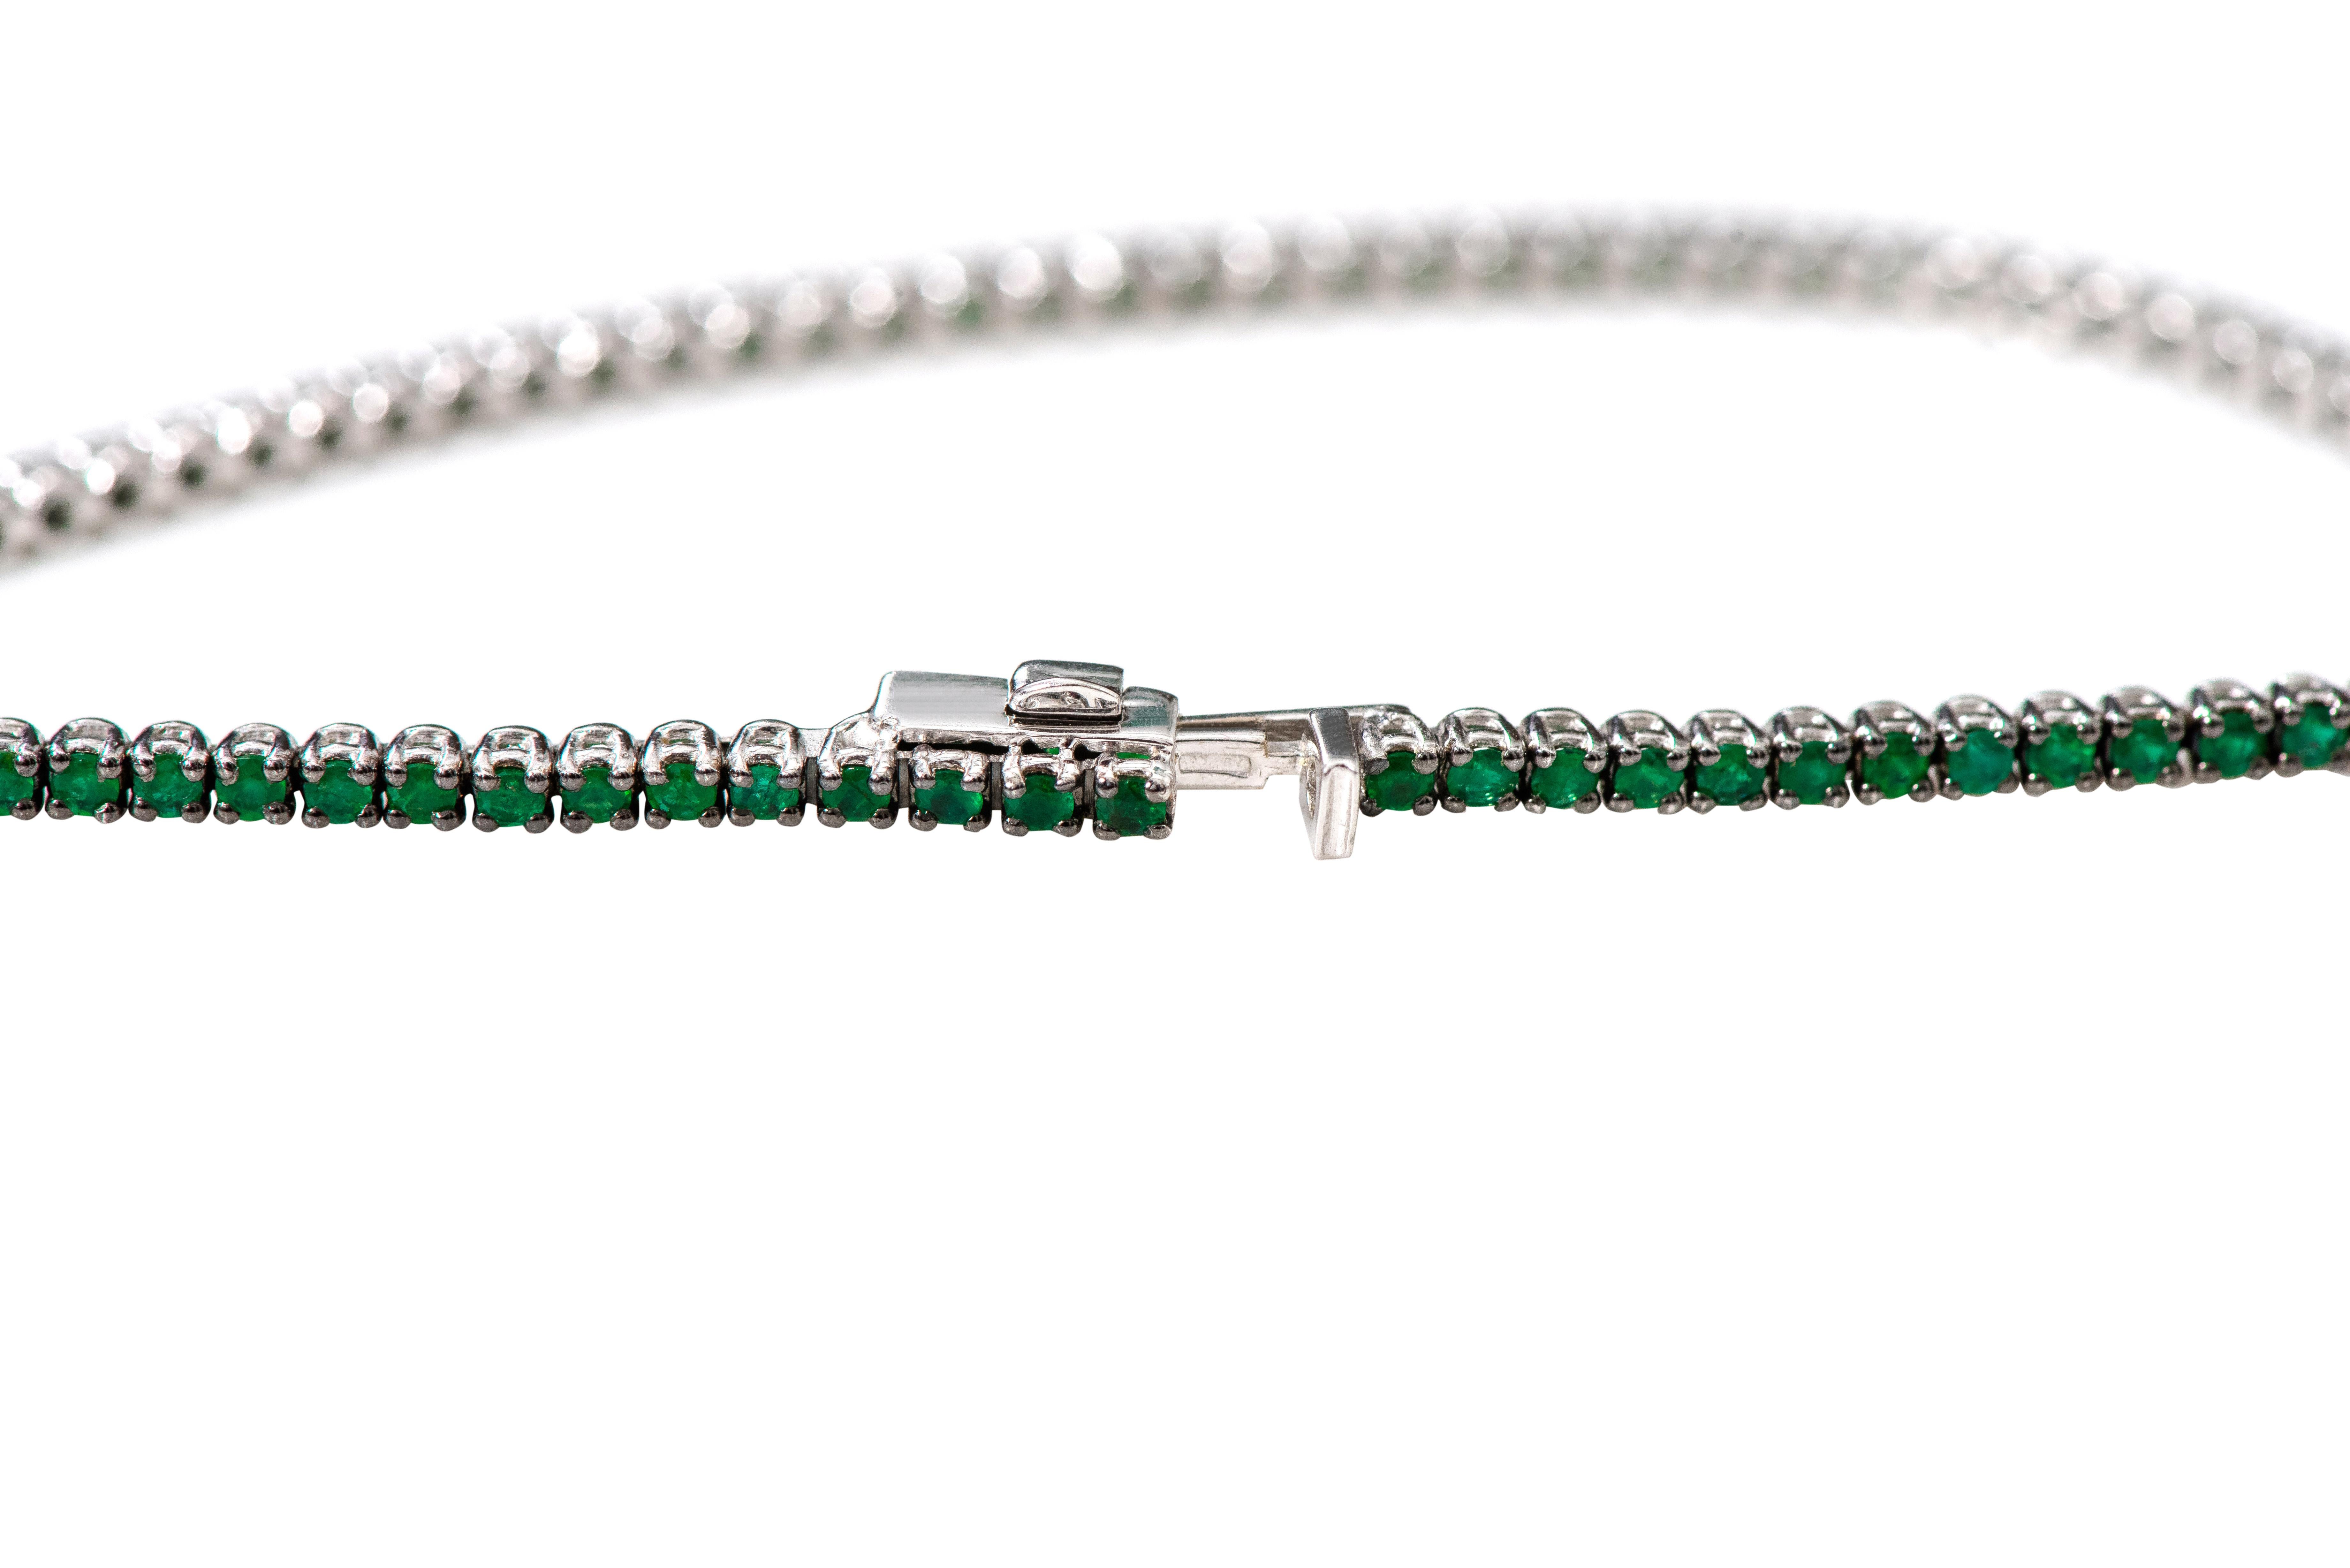 18 Karat White Gold 2.68 Carat Round-Cut Emerald Tennis Bracelet

This classy and elegant pine green emerald thin tennis bracelet is eternal. The tennis bracelet with identical size round solitaire emeralds with the perfect cut and crown is